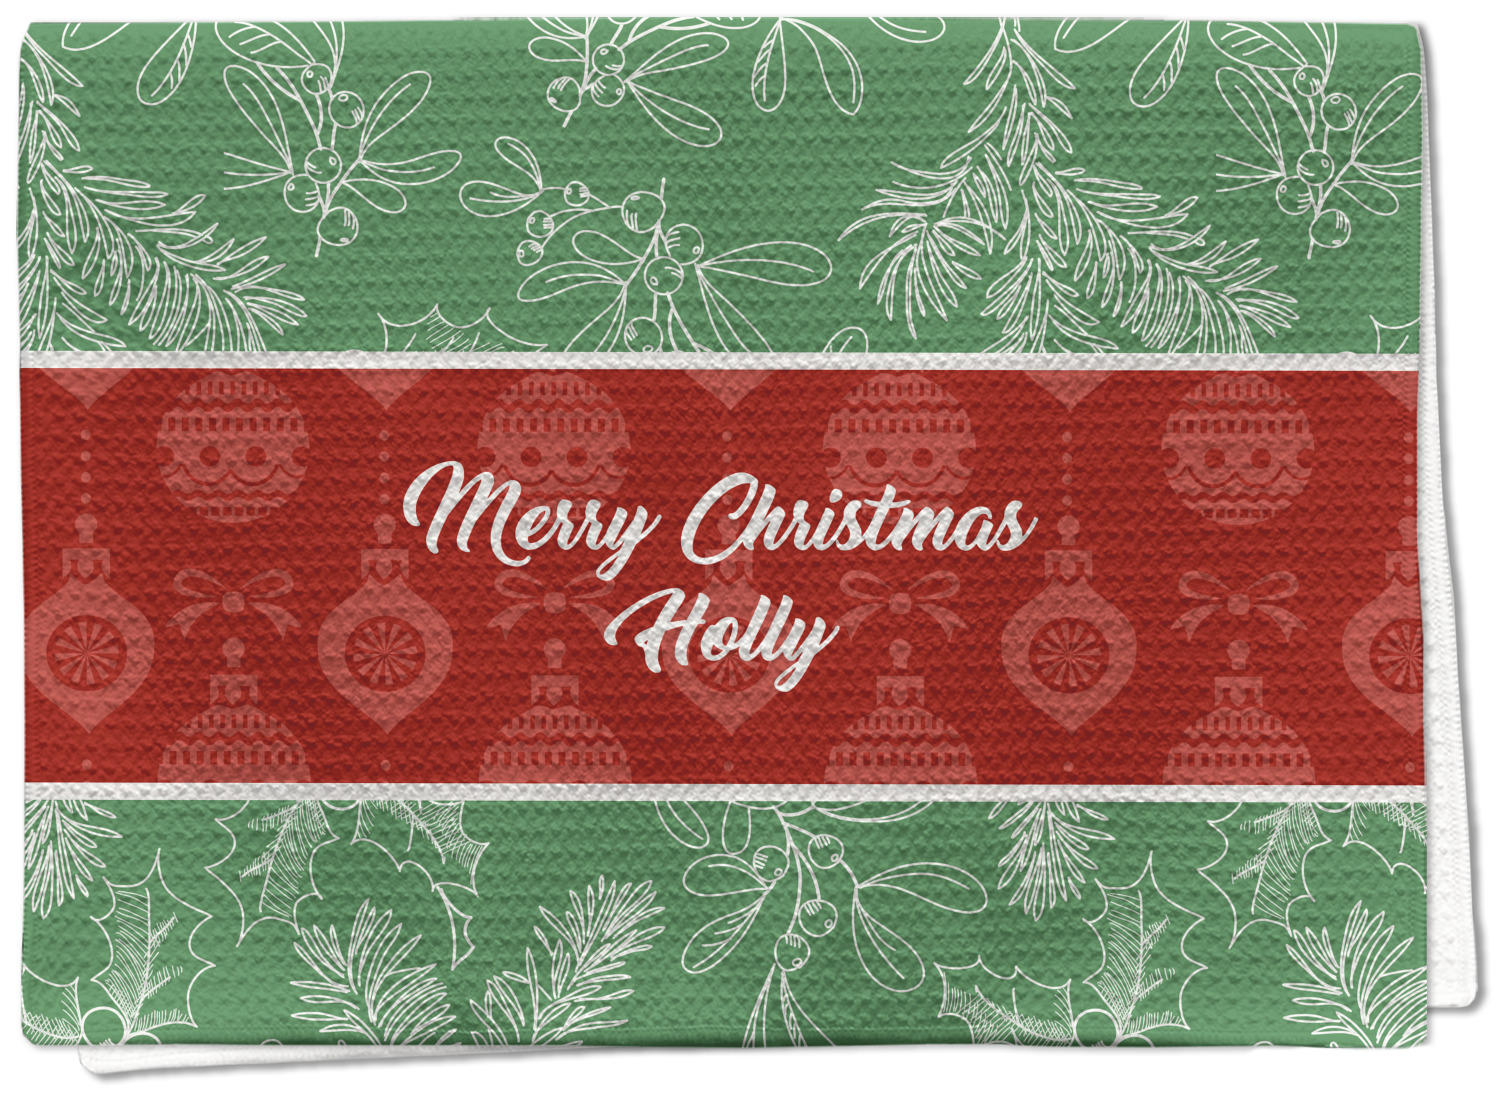 https://www.youcustomizeit.com/common/MAKE/204358/Christmas-Holly-Waffle-Weave-Towel-Full-Print-MAIN.jpg?lm=1697658805